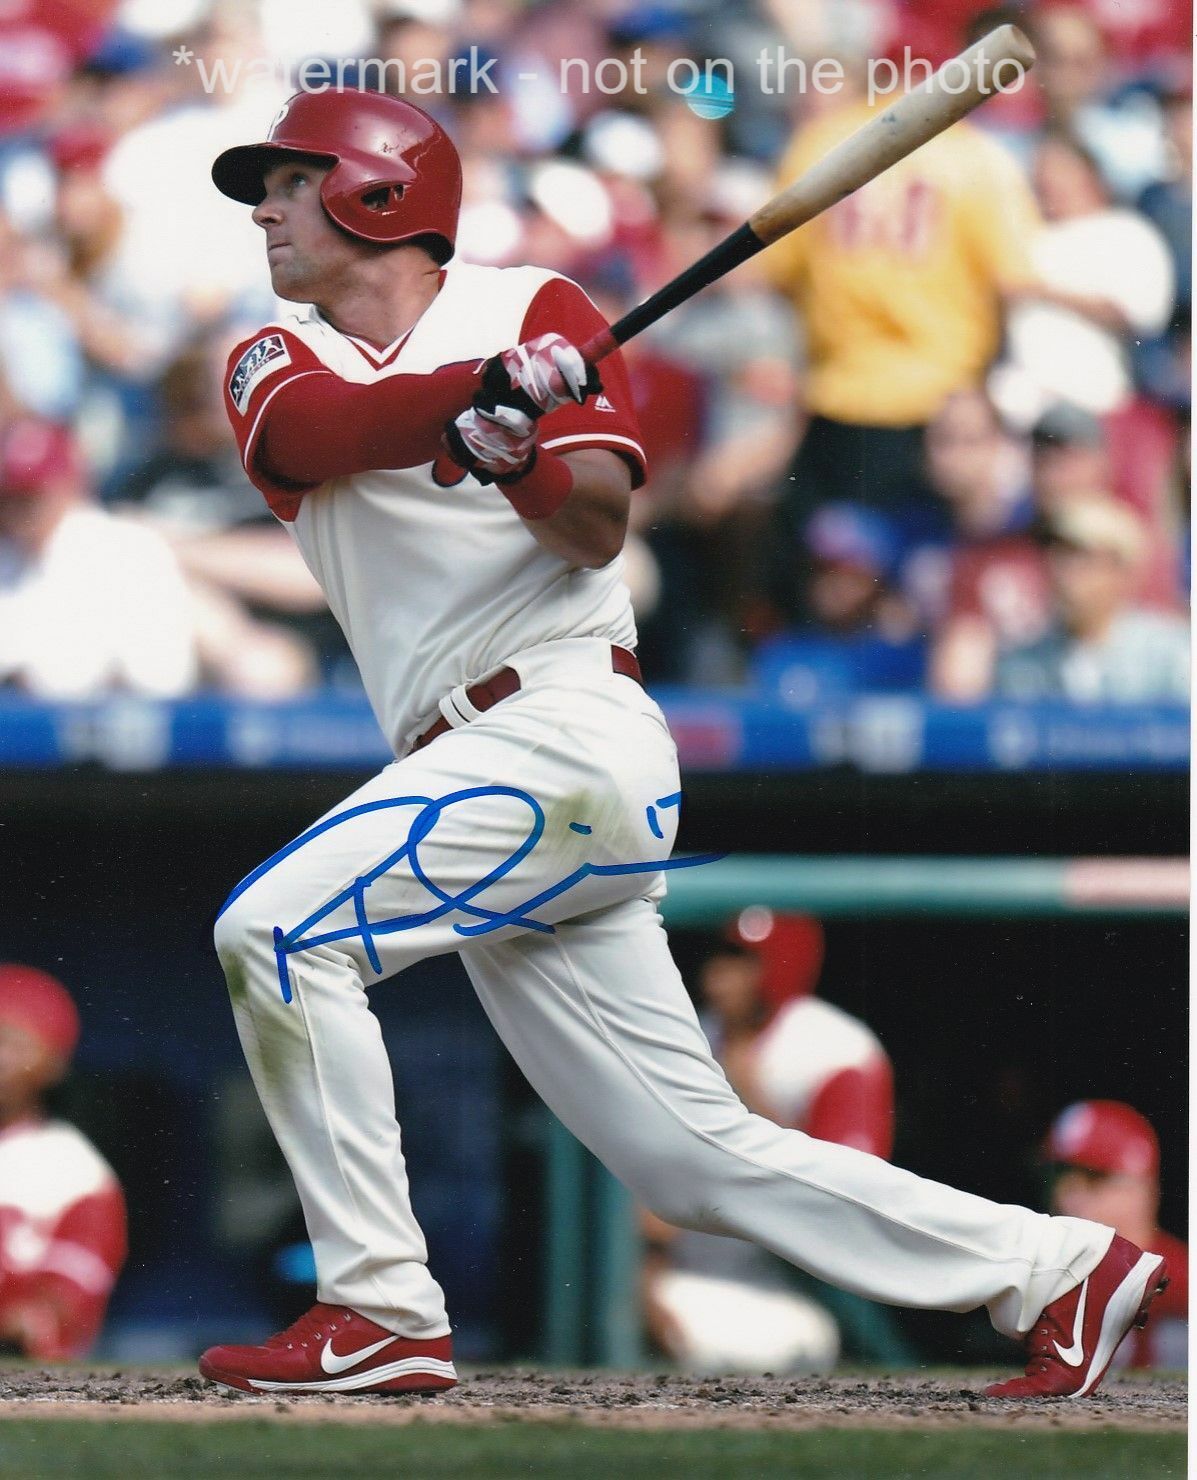 RHYS HOSKINS SIGNED AUTOGRAPH 8X10 Photo Poster painting PHILADELPHIA PHILLIES